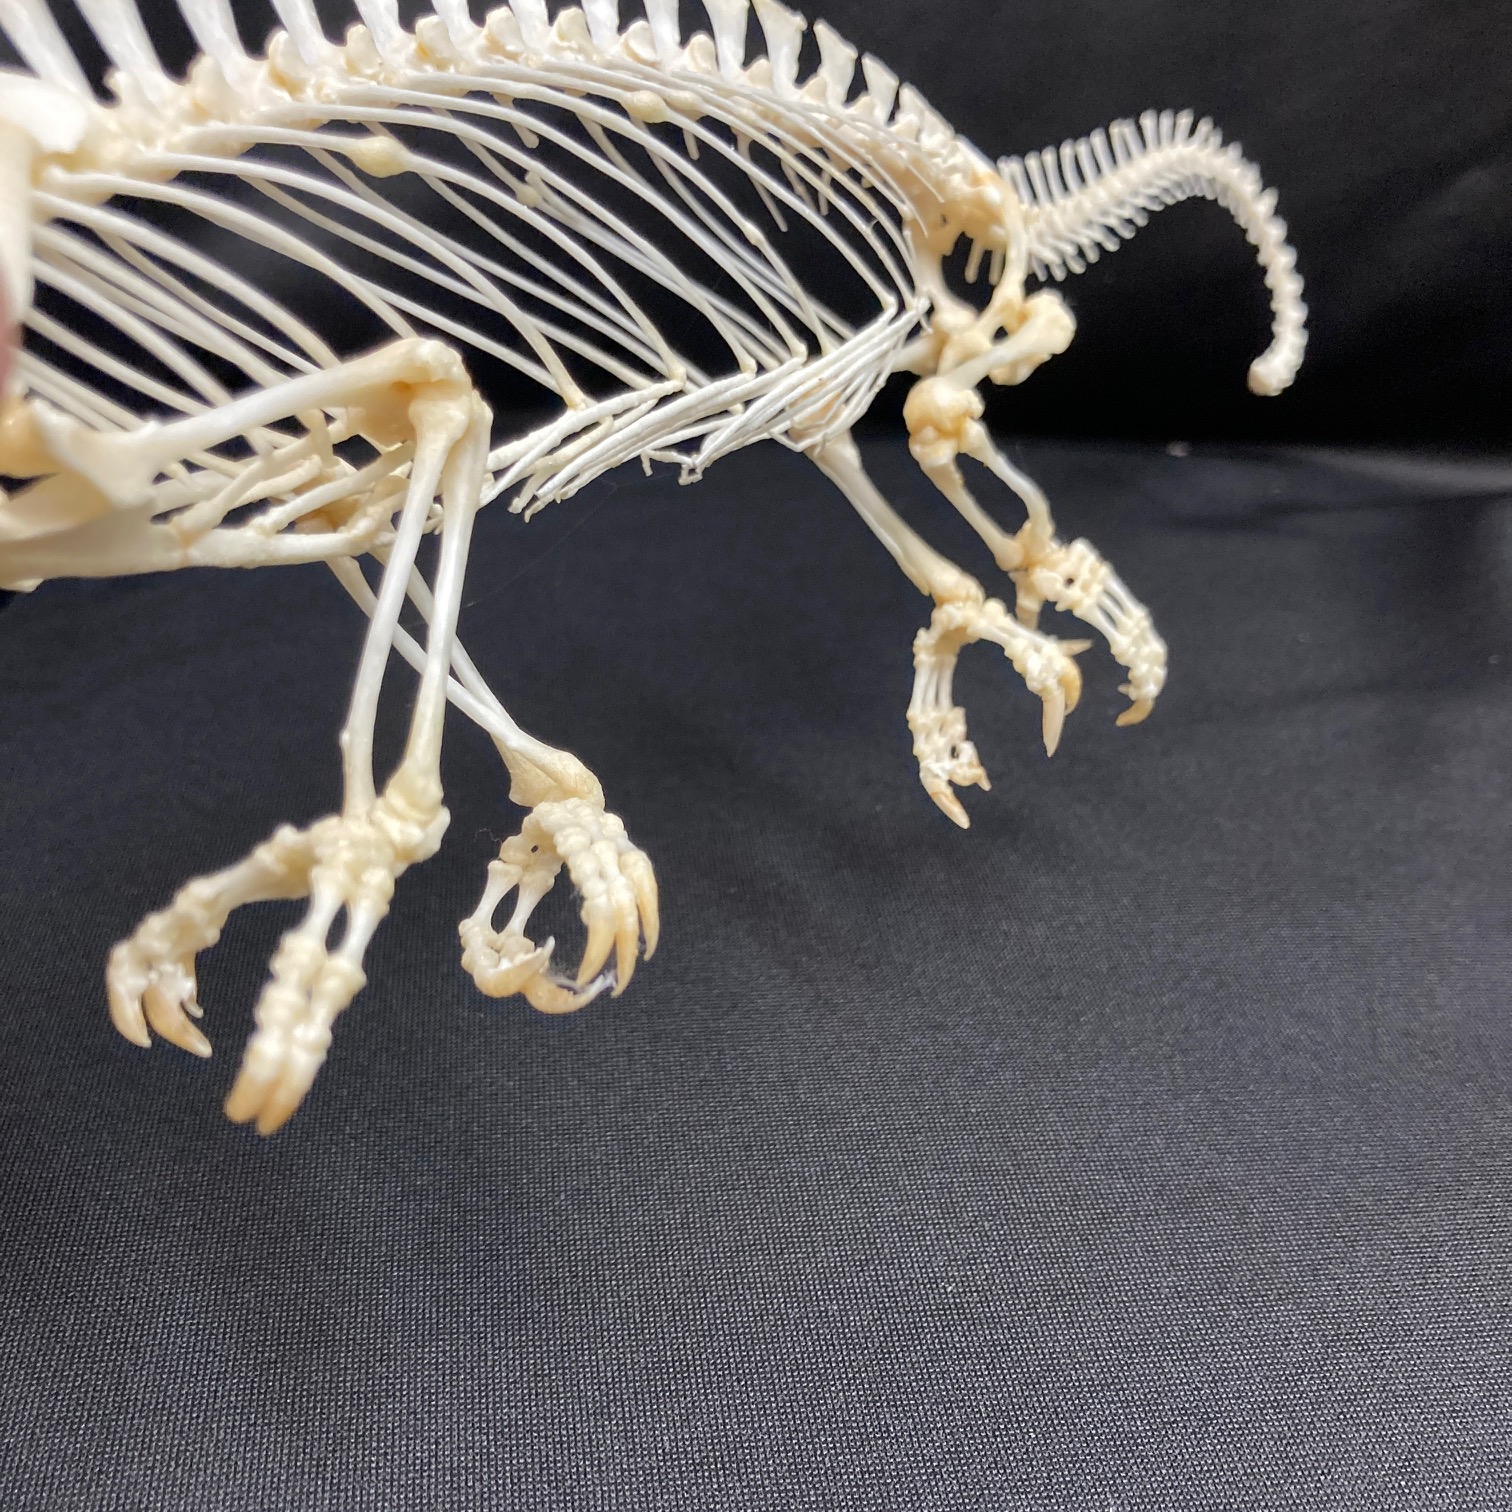 Lizard, Bearded Dragon Skeleton, Museum quality specimen. - nātür showroom  - Museum quality insects, butterflies and natural history collectibles,  artifacts and gifts